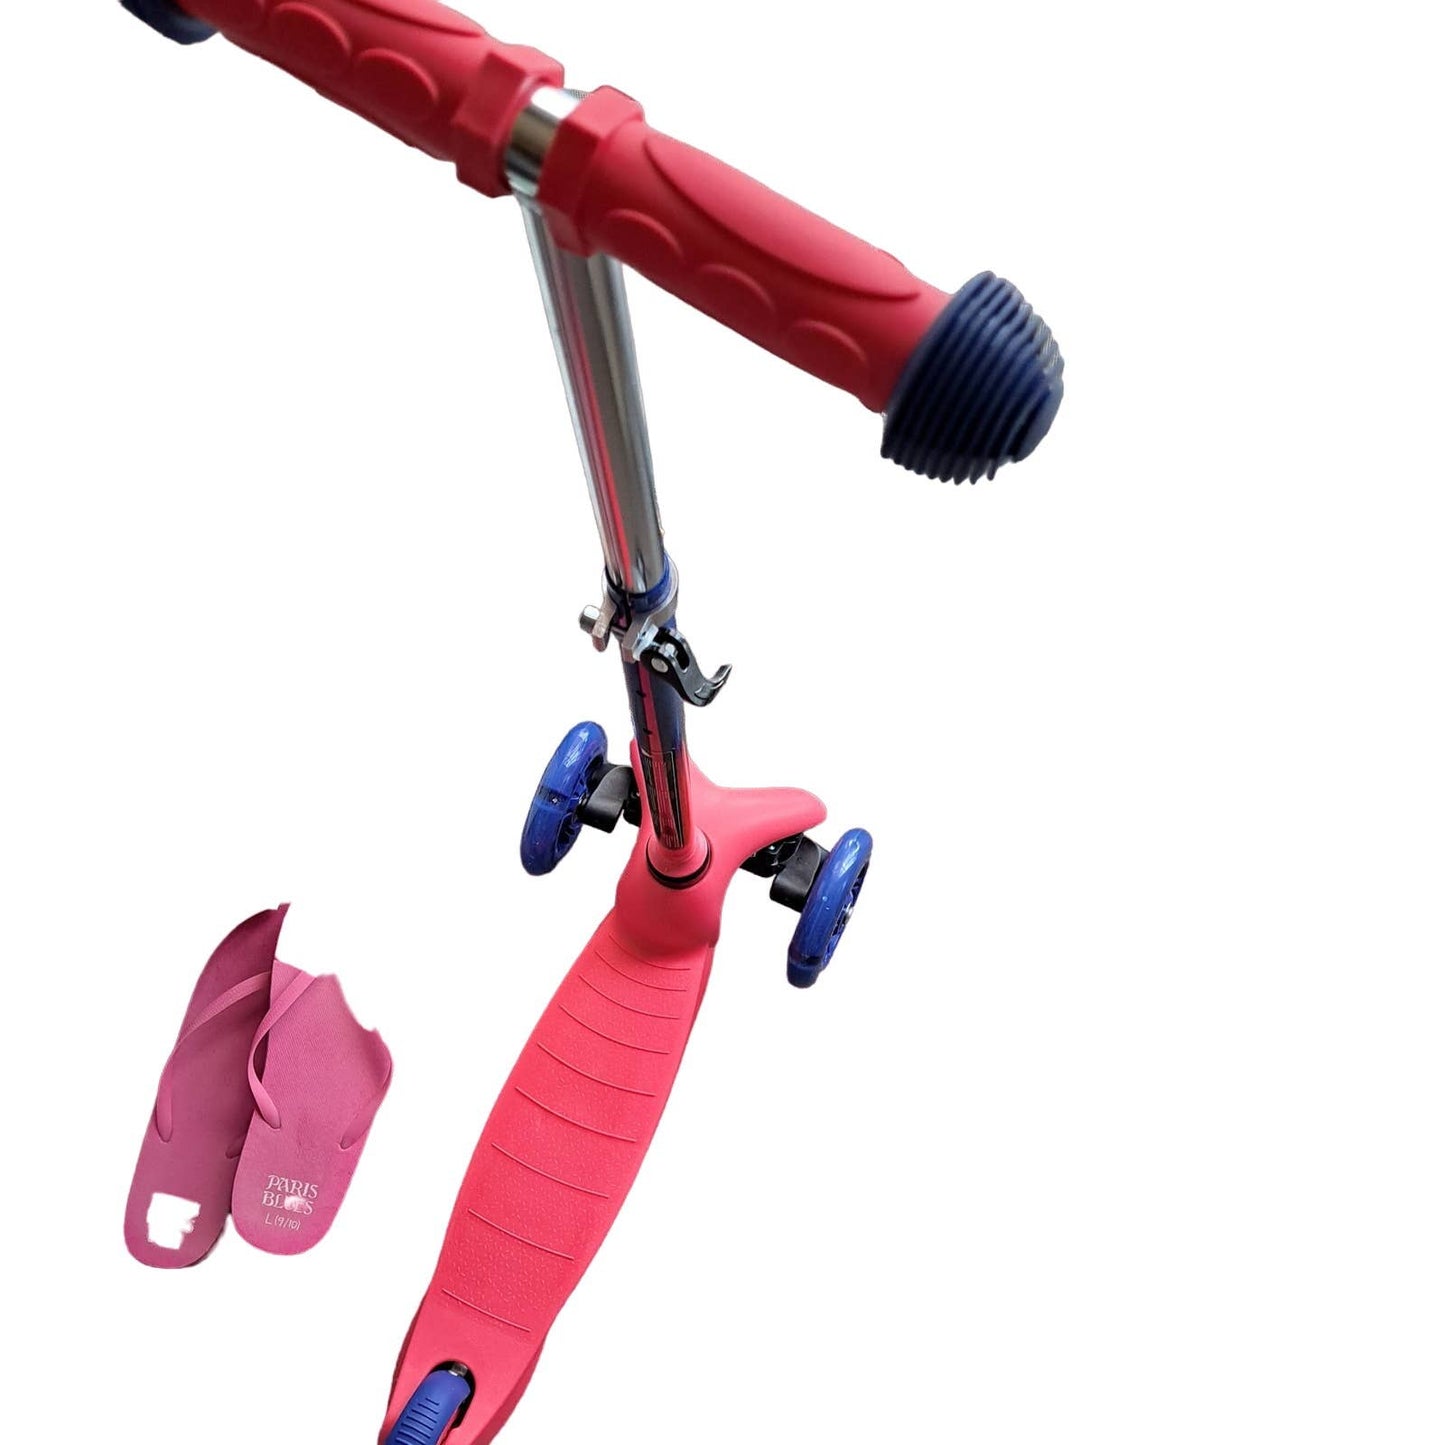 NIB - Children's Scooter 2-5 Years LED Wheels Bright Pink & Blue